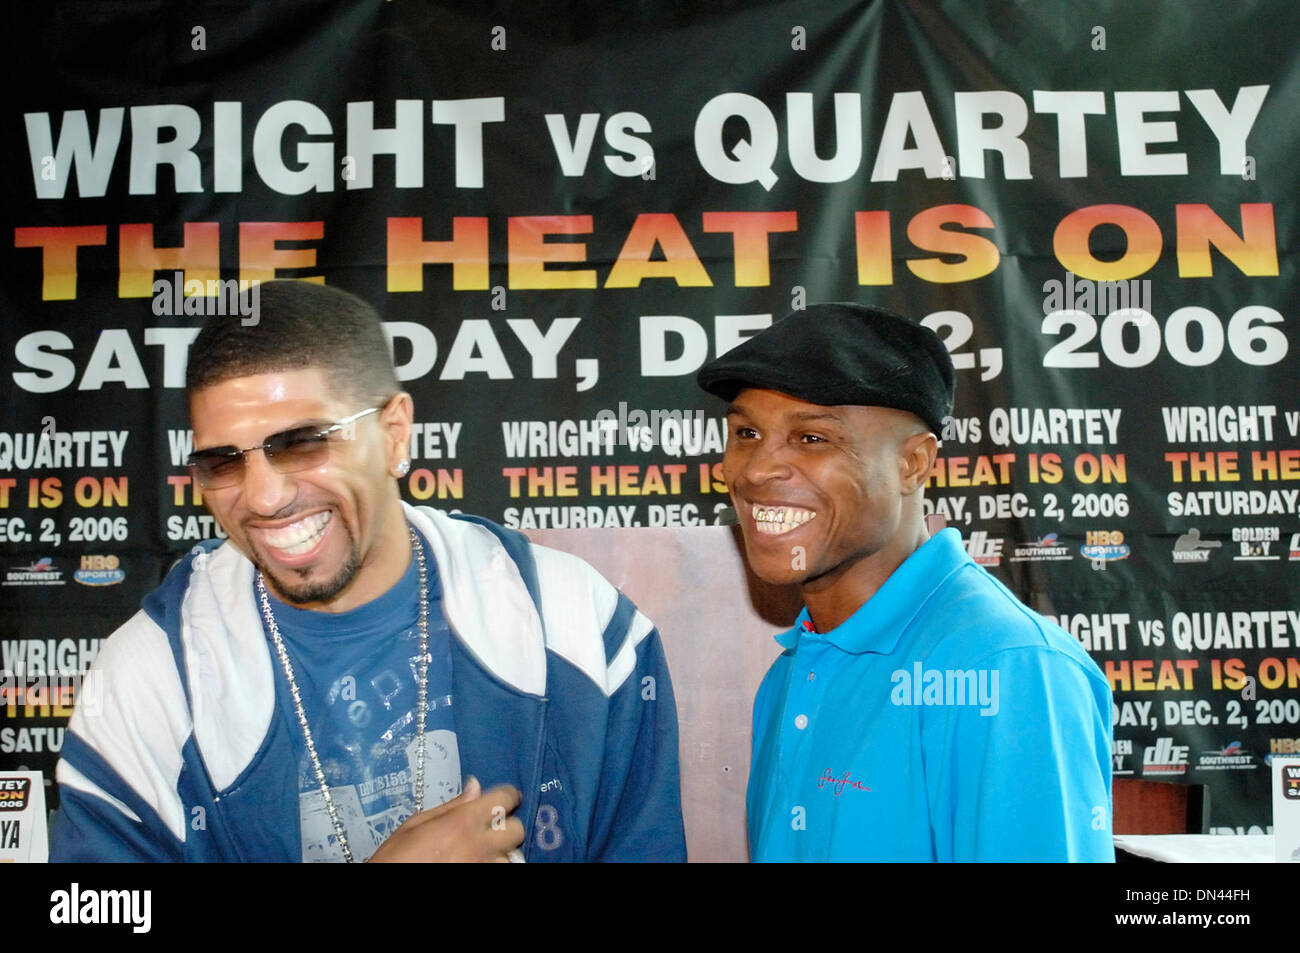 Nov 29, 2006; Tampa, FL, USA; Boxers 'RONALD WINKY' WRIGHT and IKE 'BAZOOKA' QUARTEY at the final press conference for their upcoming bouts on Saturday December 2 at The St. Pete Times Forum in Tampa. Mandatory Credit: Photo by Rob DeLorenzo/ZUMA Press. (©) Copyright 2006 by Rob DeLorenzo Stock Photo